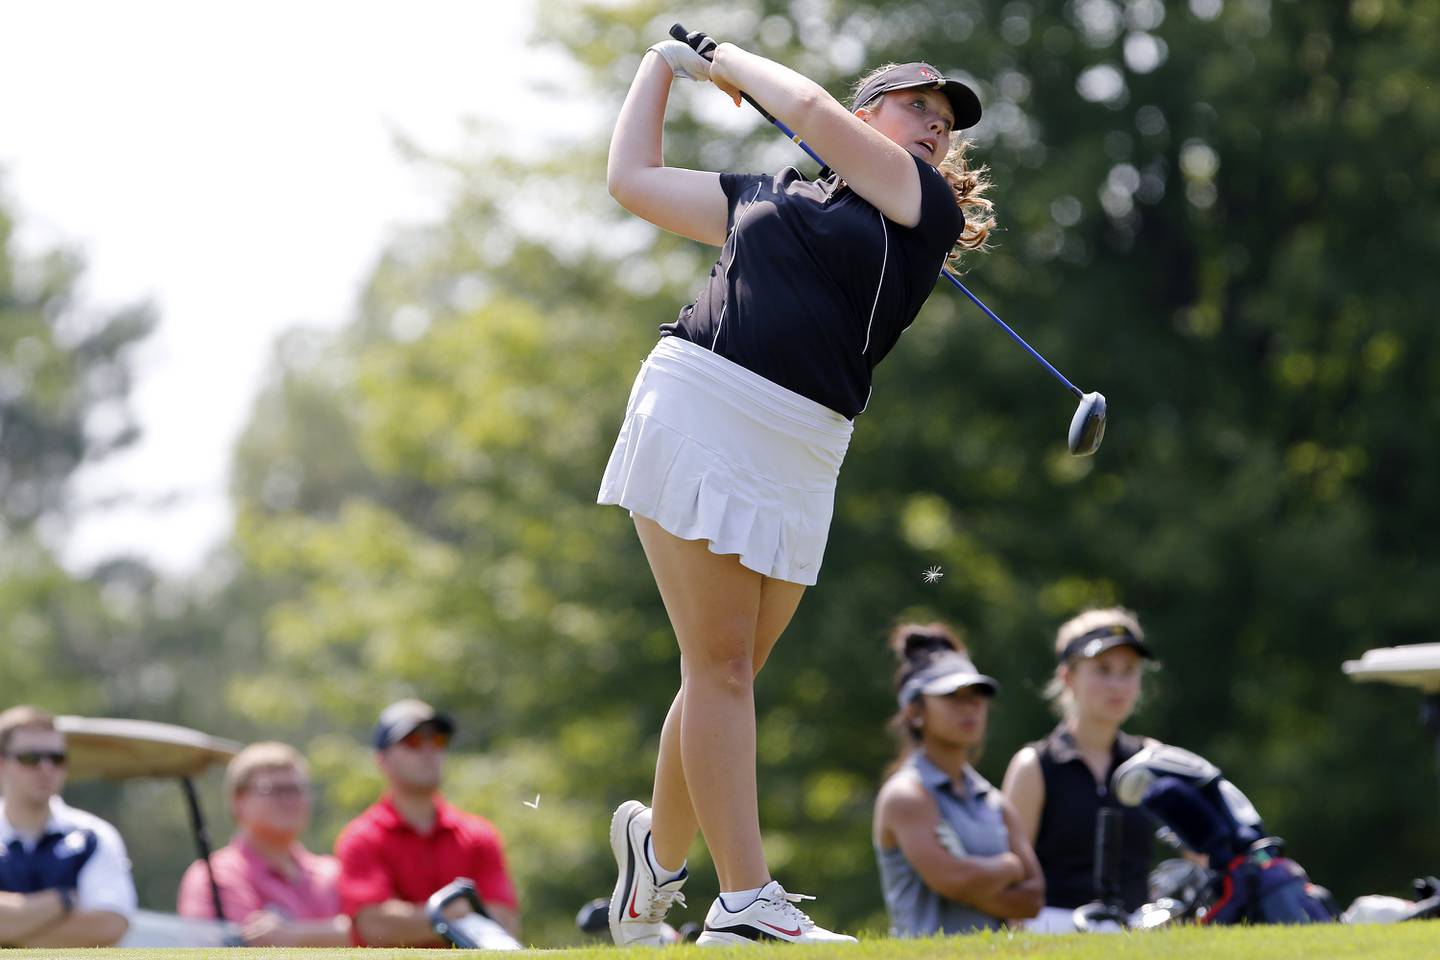 Cary-Grove's Delaney Medlyn tees off on the first hole during the McHenry County Junior Golf Association's Tournament of Champions on Thursday, Aug. 5, 2021 at Woodstock Country Club in Bull Valley.